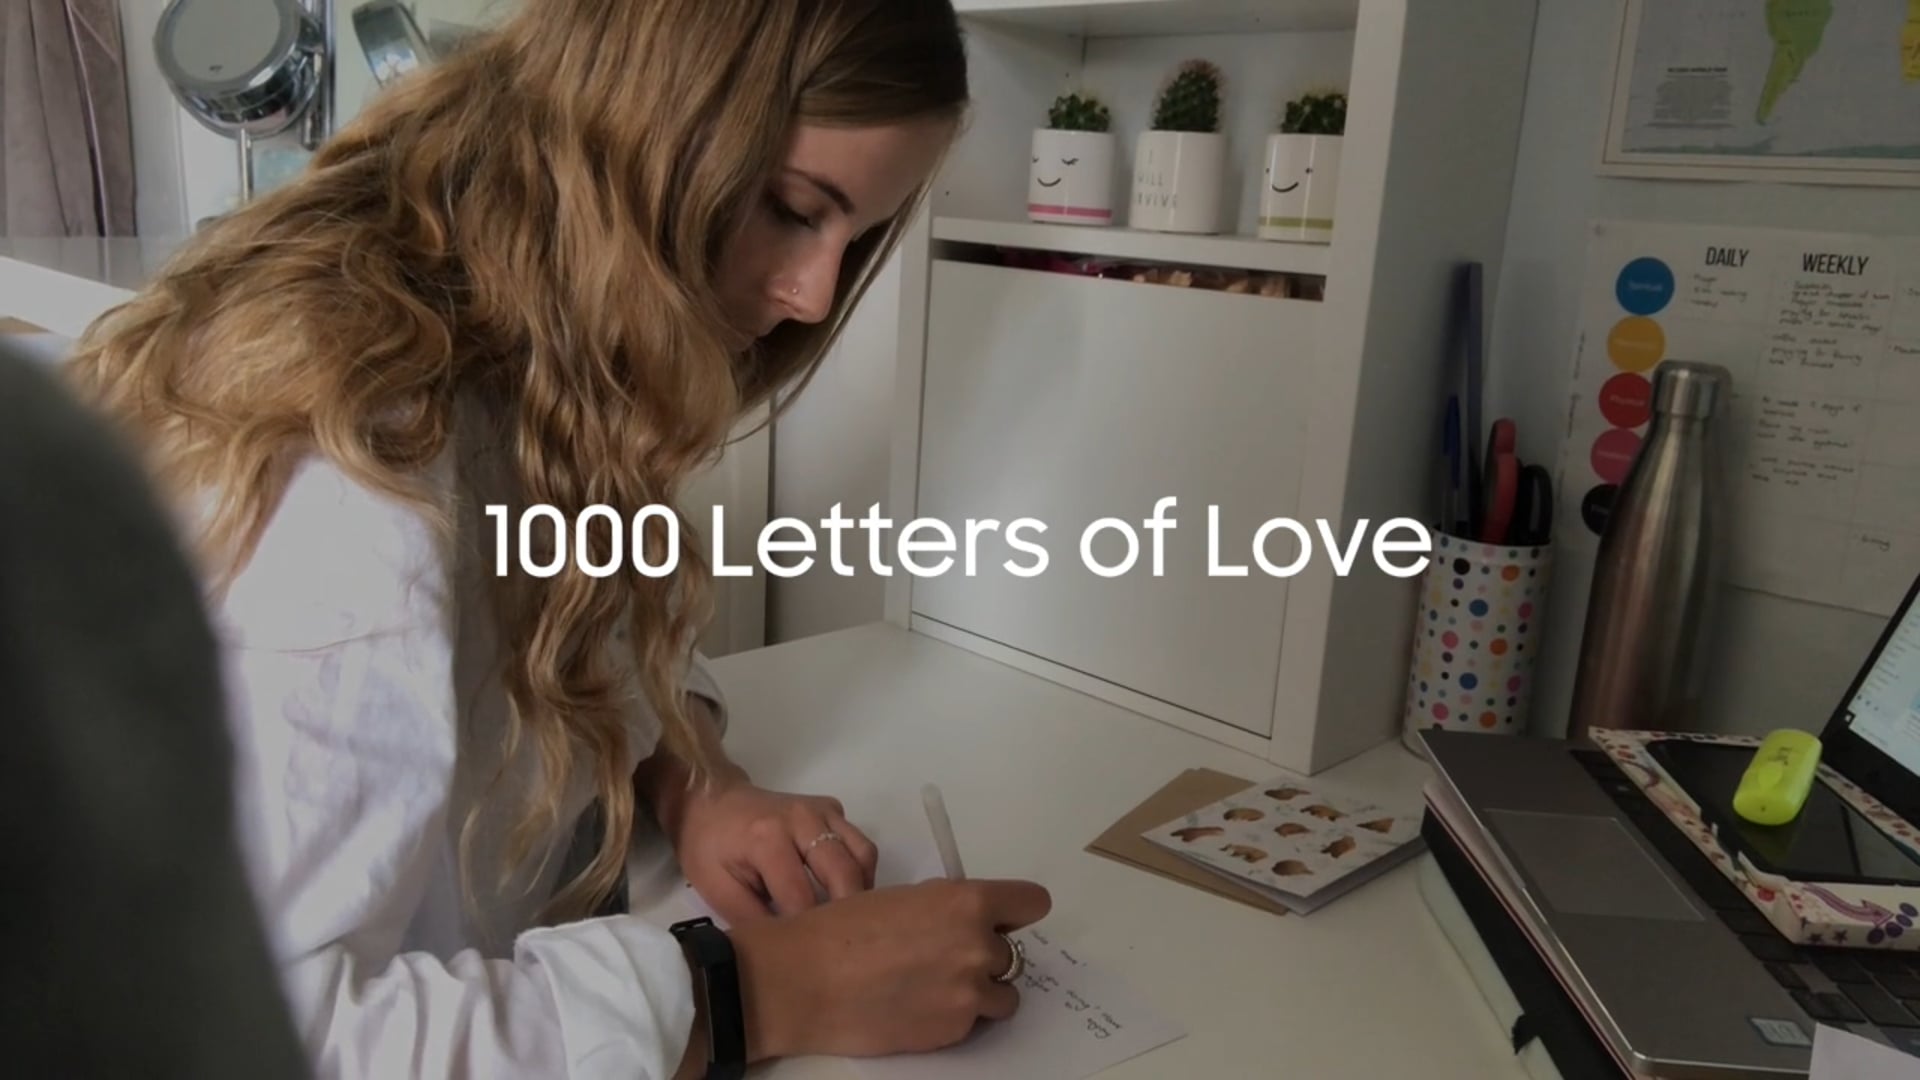 Samsung: 1000 letters of love